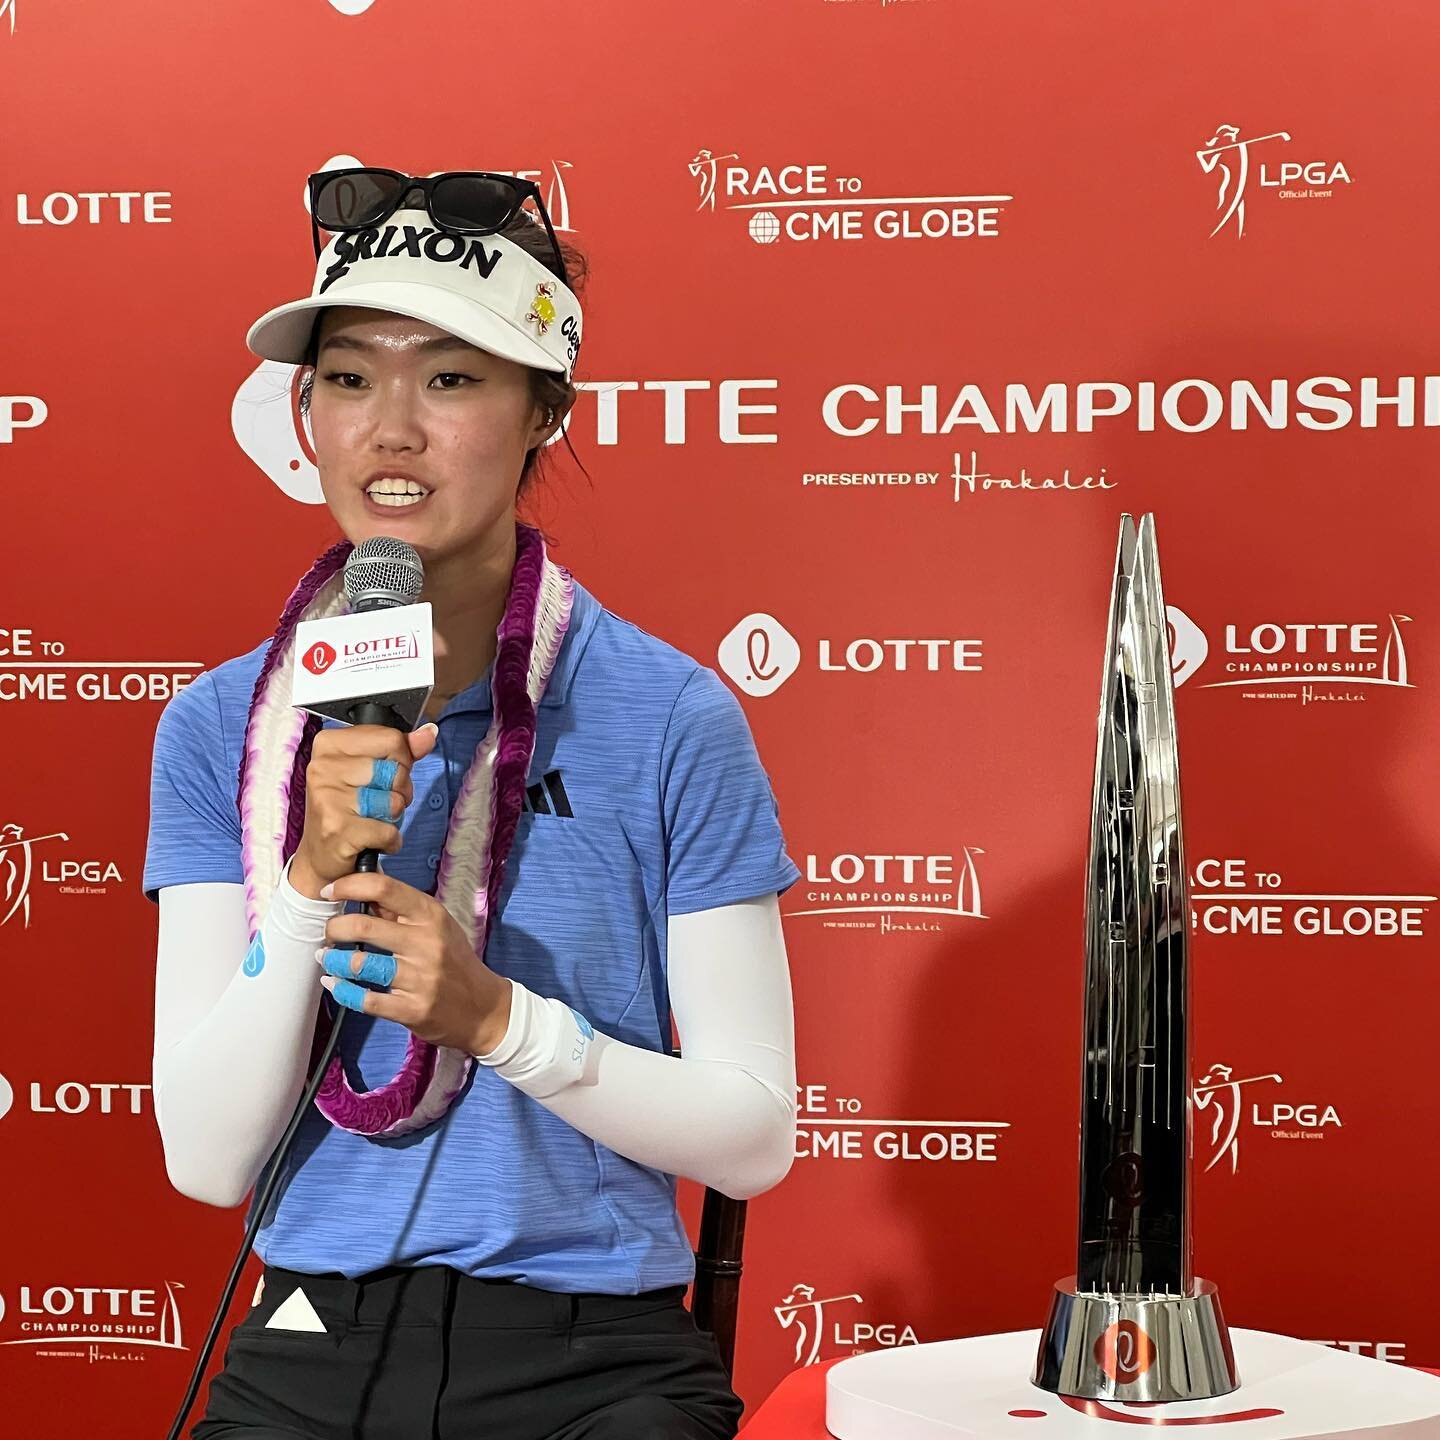 Congratulations Grace Kim!  With her #lottechampionship win, her first LPGA Tour victory, rookie Kim earns 500 points and is projected to move from 103rd to ninth in the Race to the CME Globe